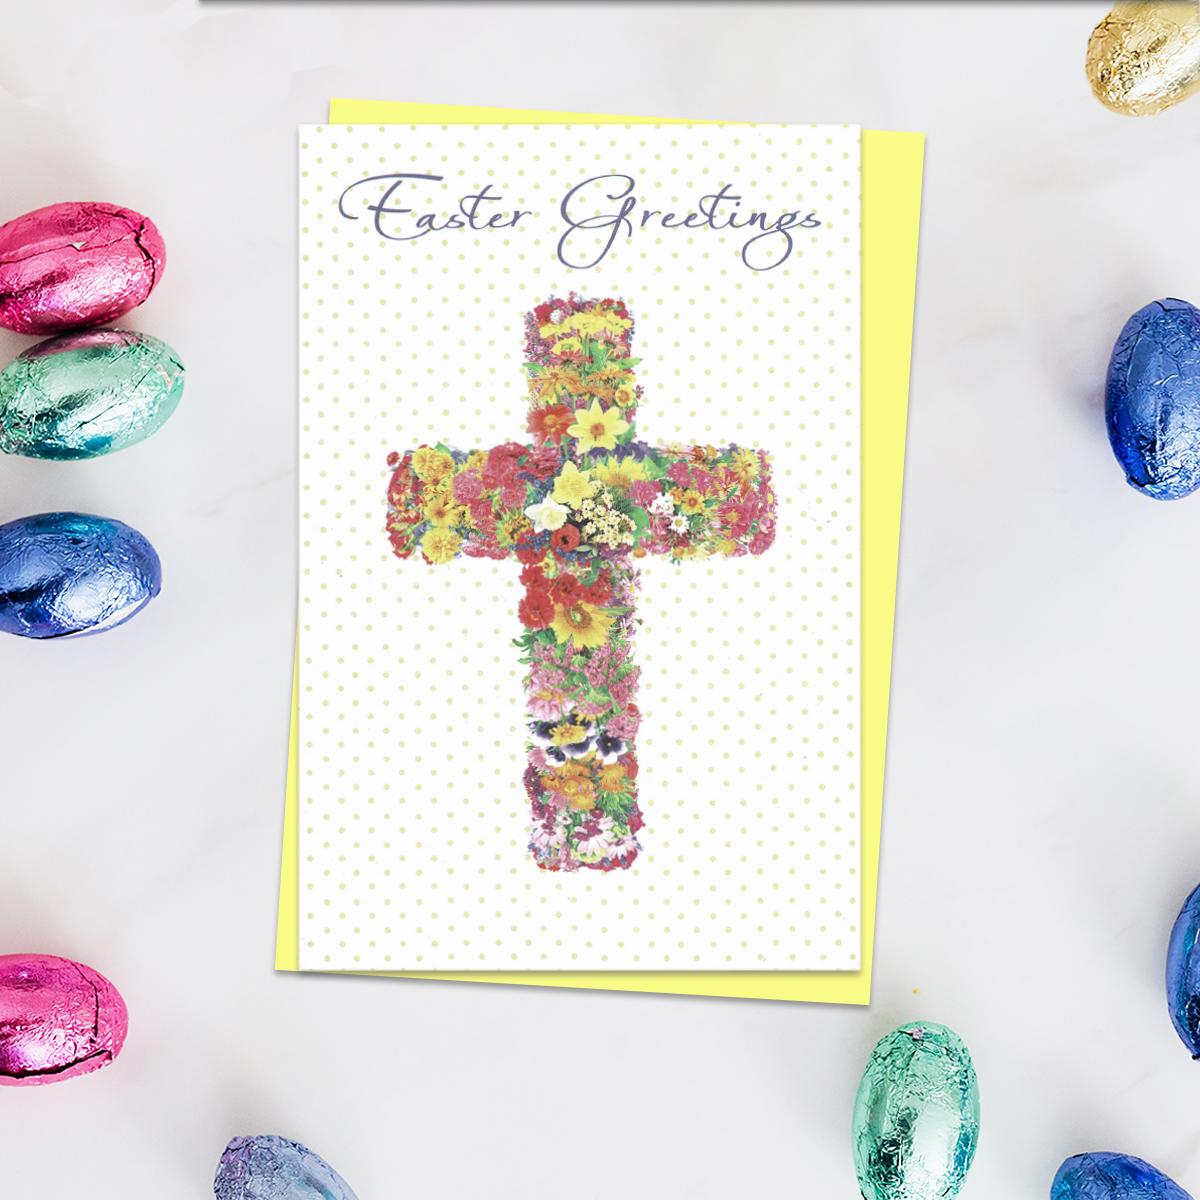 Floral Crucifix Easter Card Alongside Its Yellow Envelope